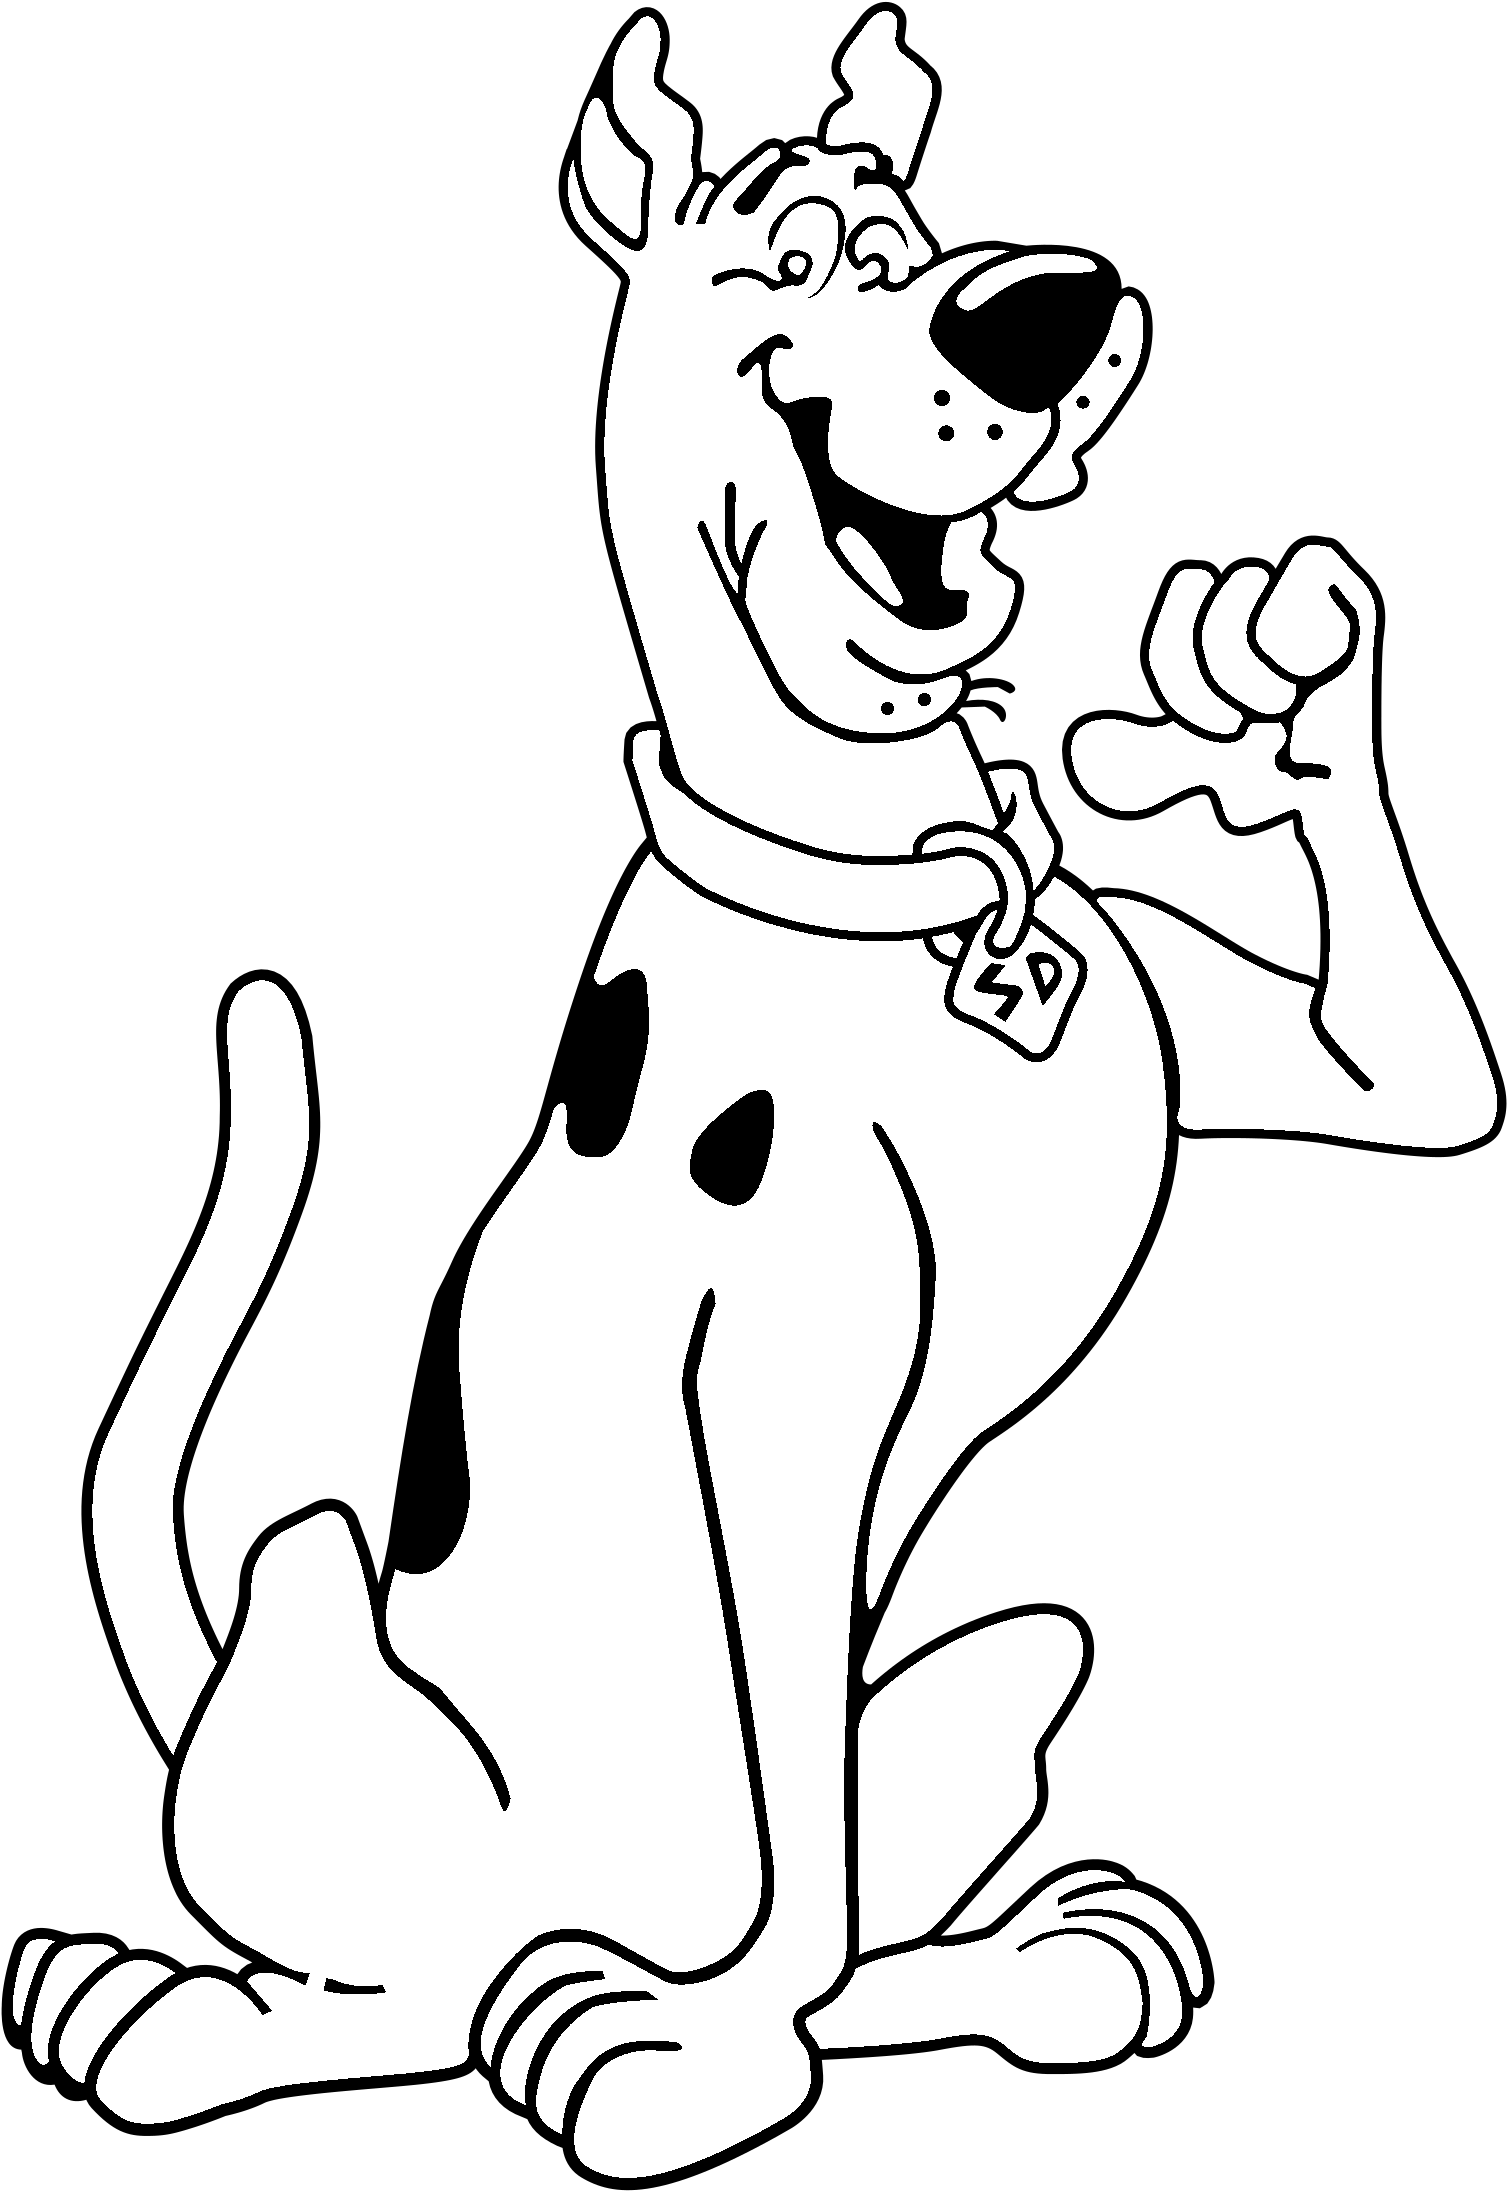 Download Scooby Doo Logo Black And White - Scooby Doo Characters PNG Image  with No Background 